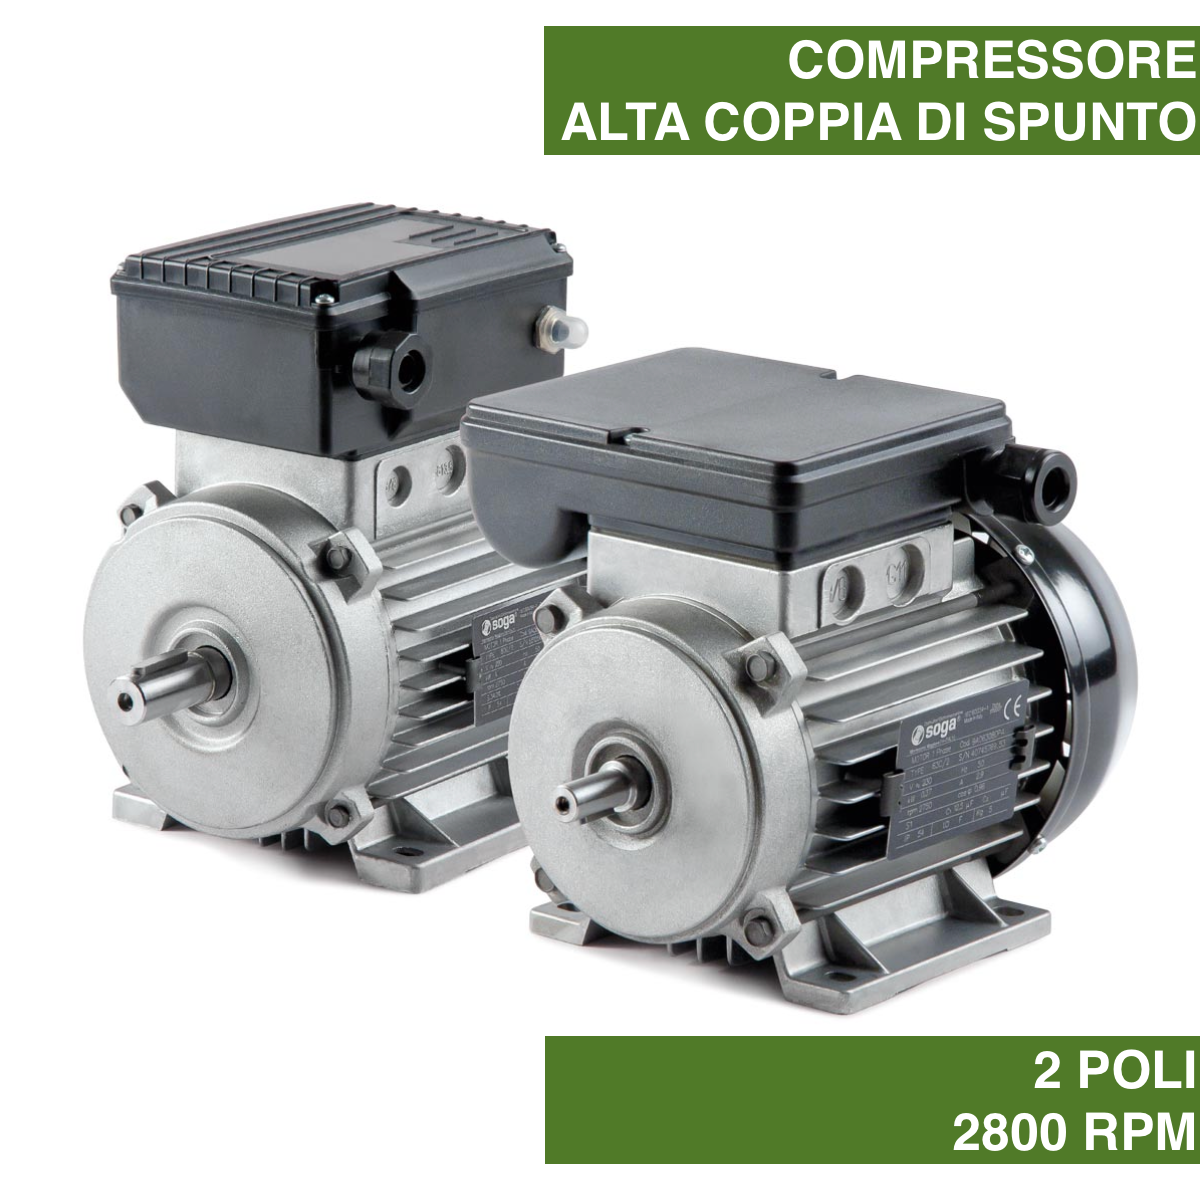 Single-phase 2-pole AC low voltage IEC induction motors for compressors